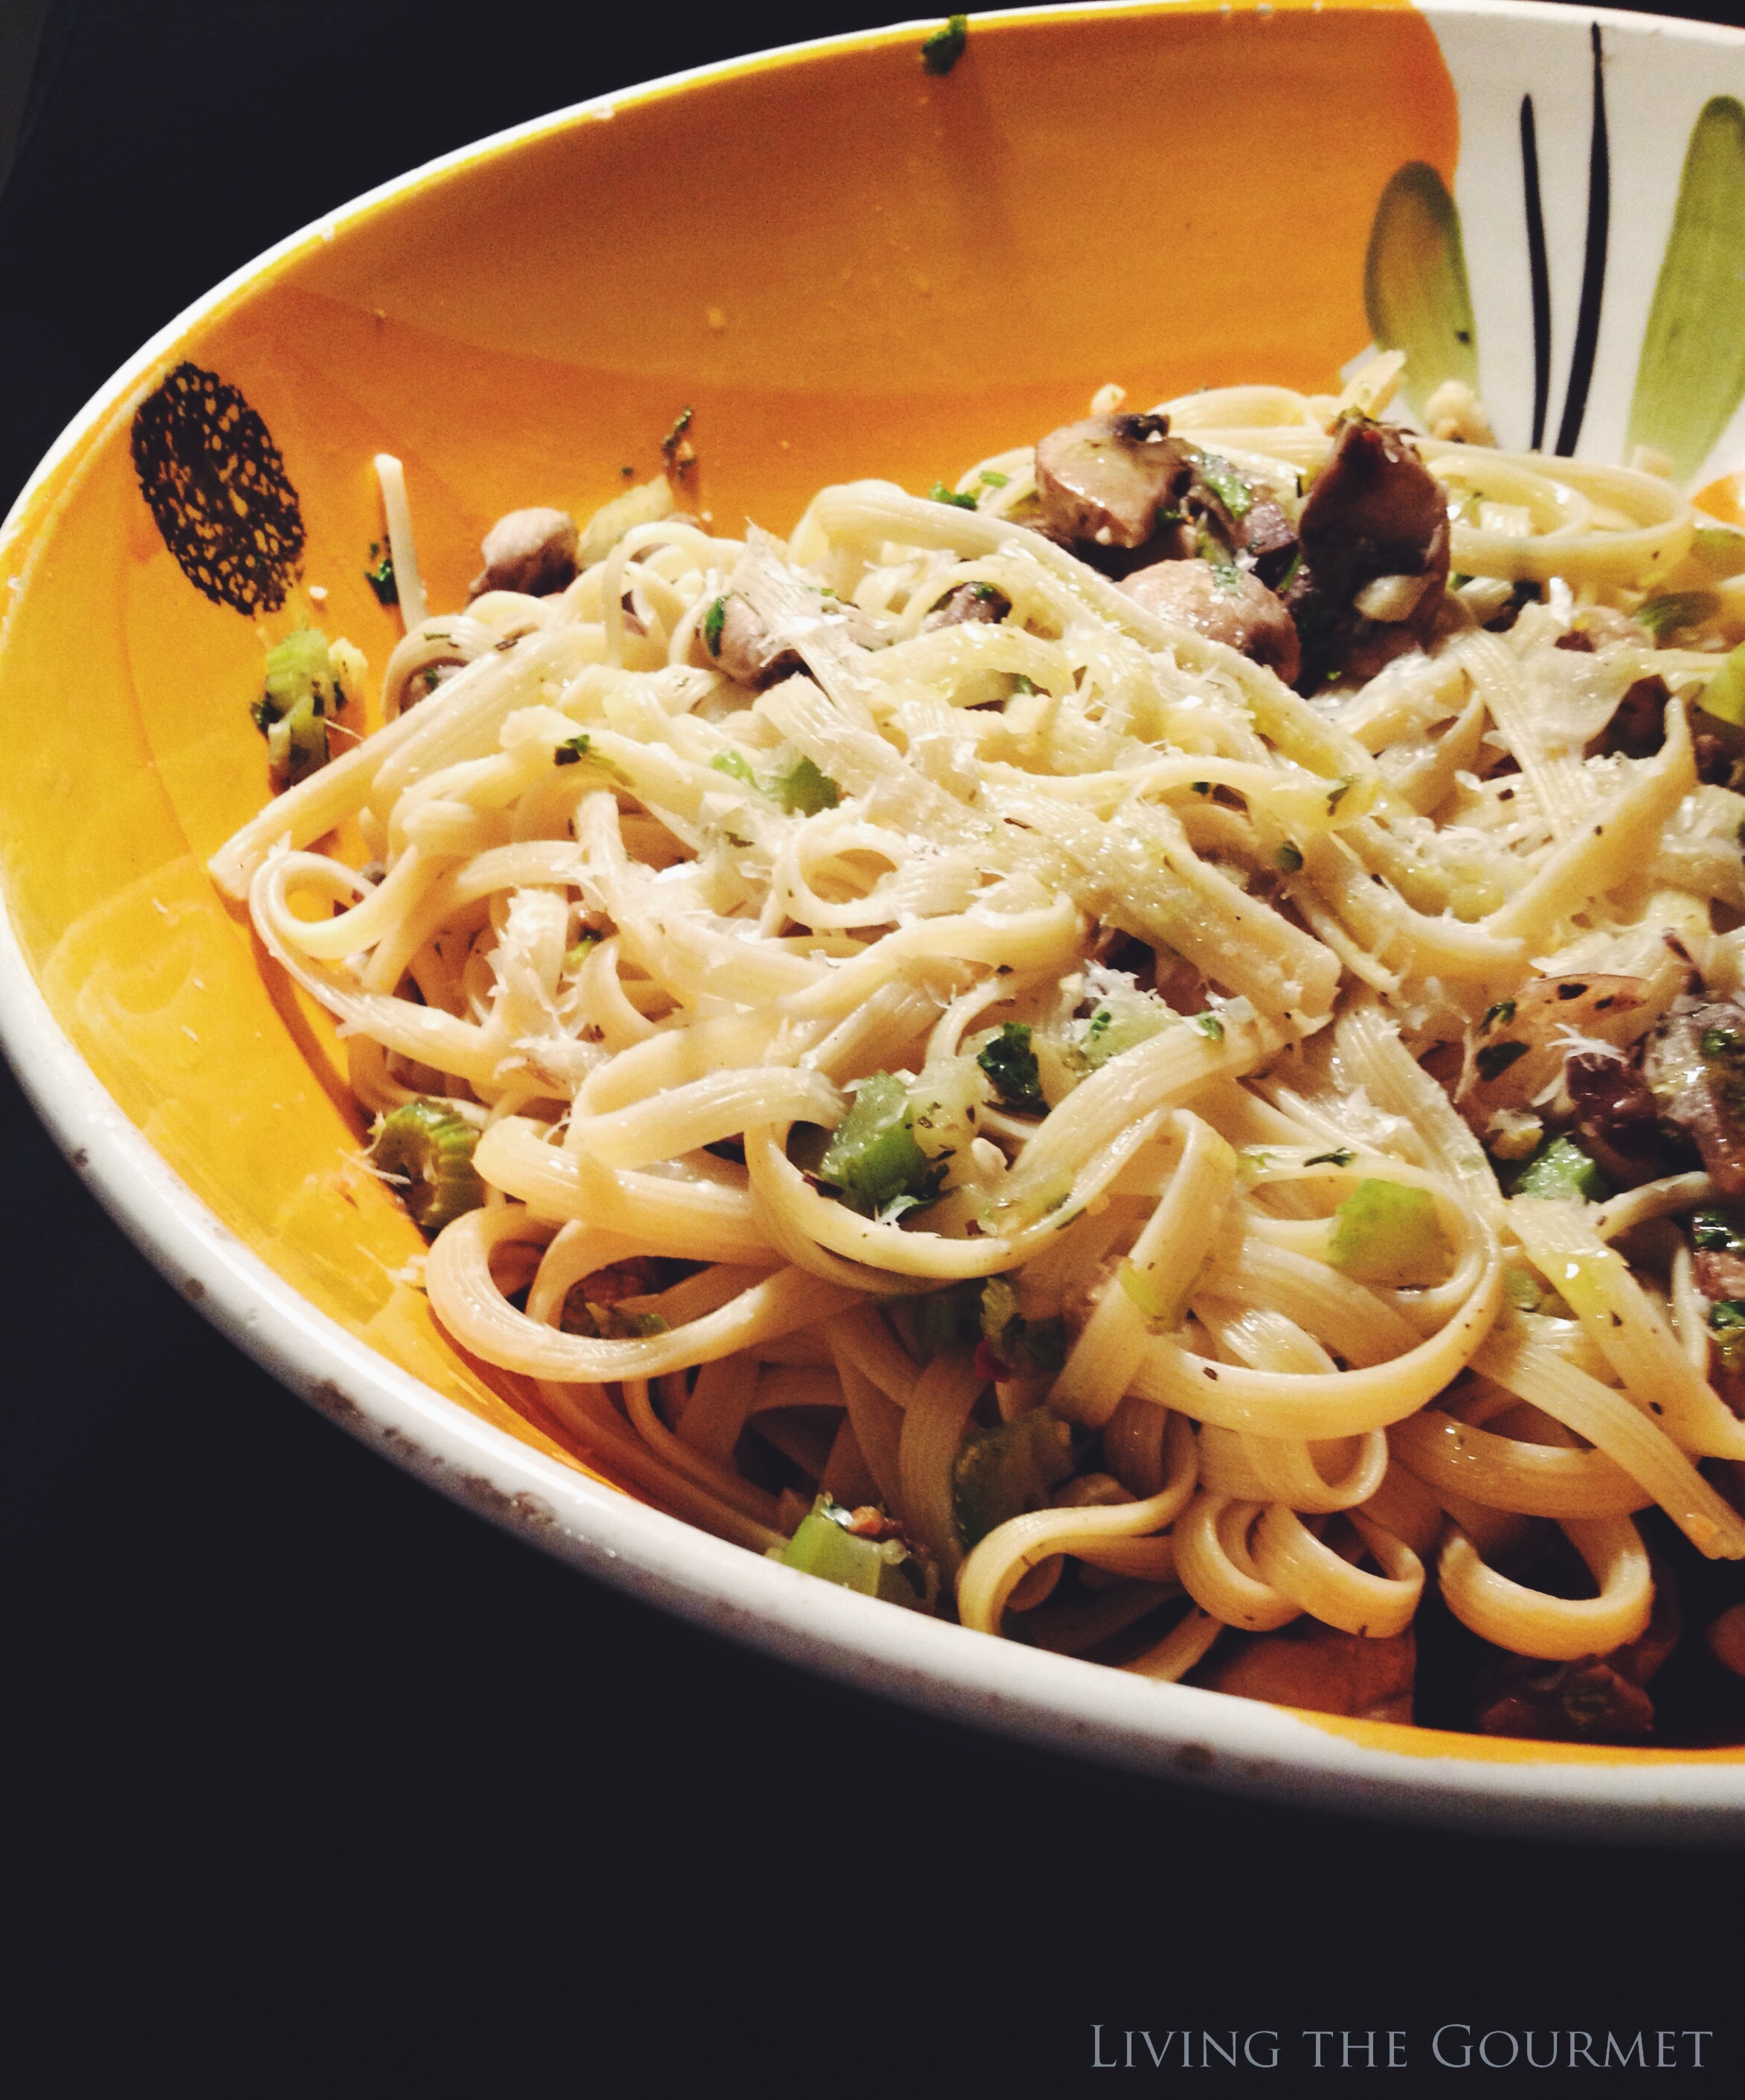 Living the Gourmet: Fettuccini with Mushrooms